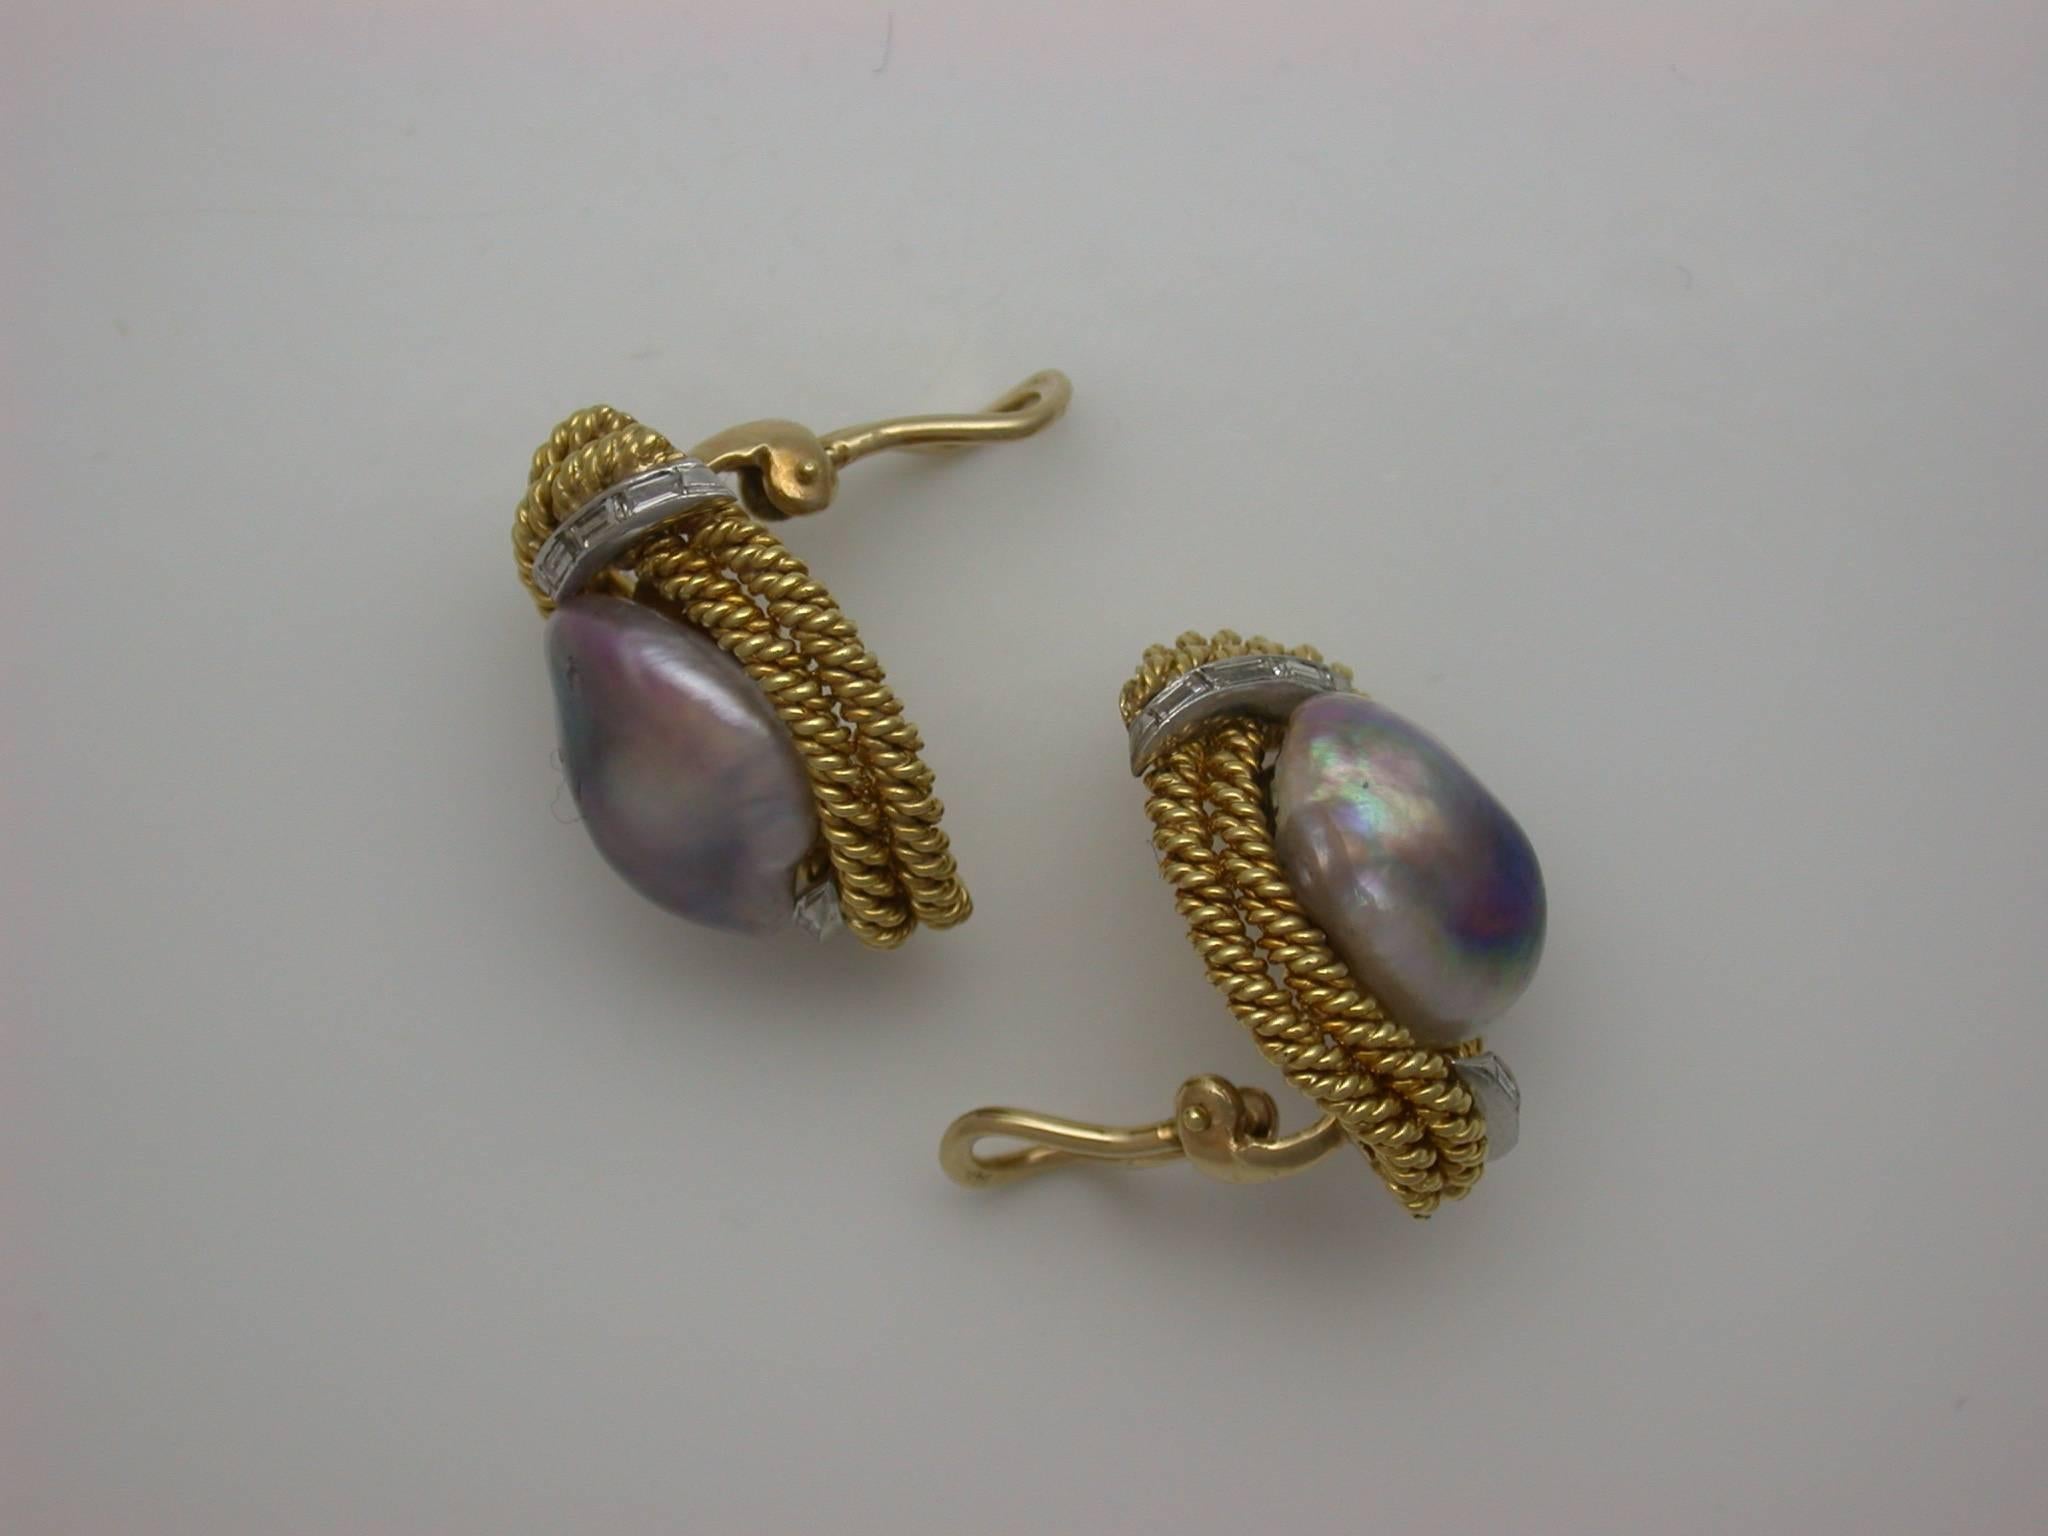 The tailored earclips designed as vertical oval frames, built from double rows of twisted yellow gold rope, centering large silver baroque freshwater pearls with pinkish-purple overtones, enhanced at top and bottom by baguette-cut diamond arcs